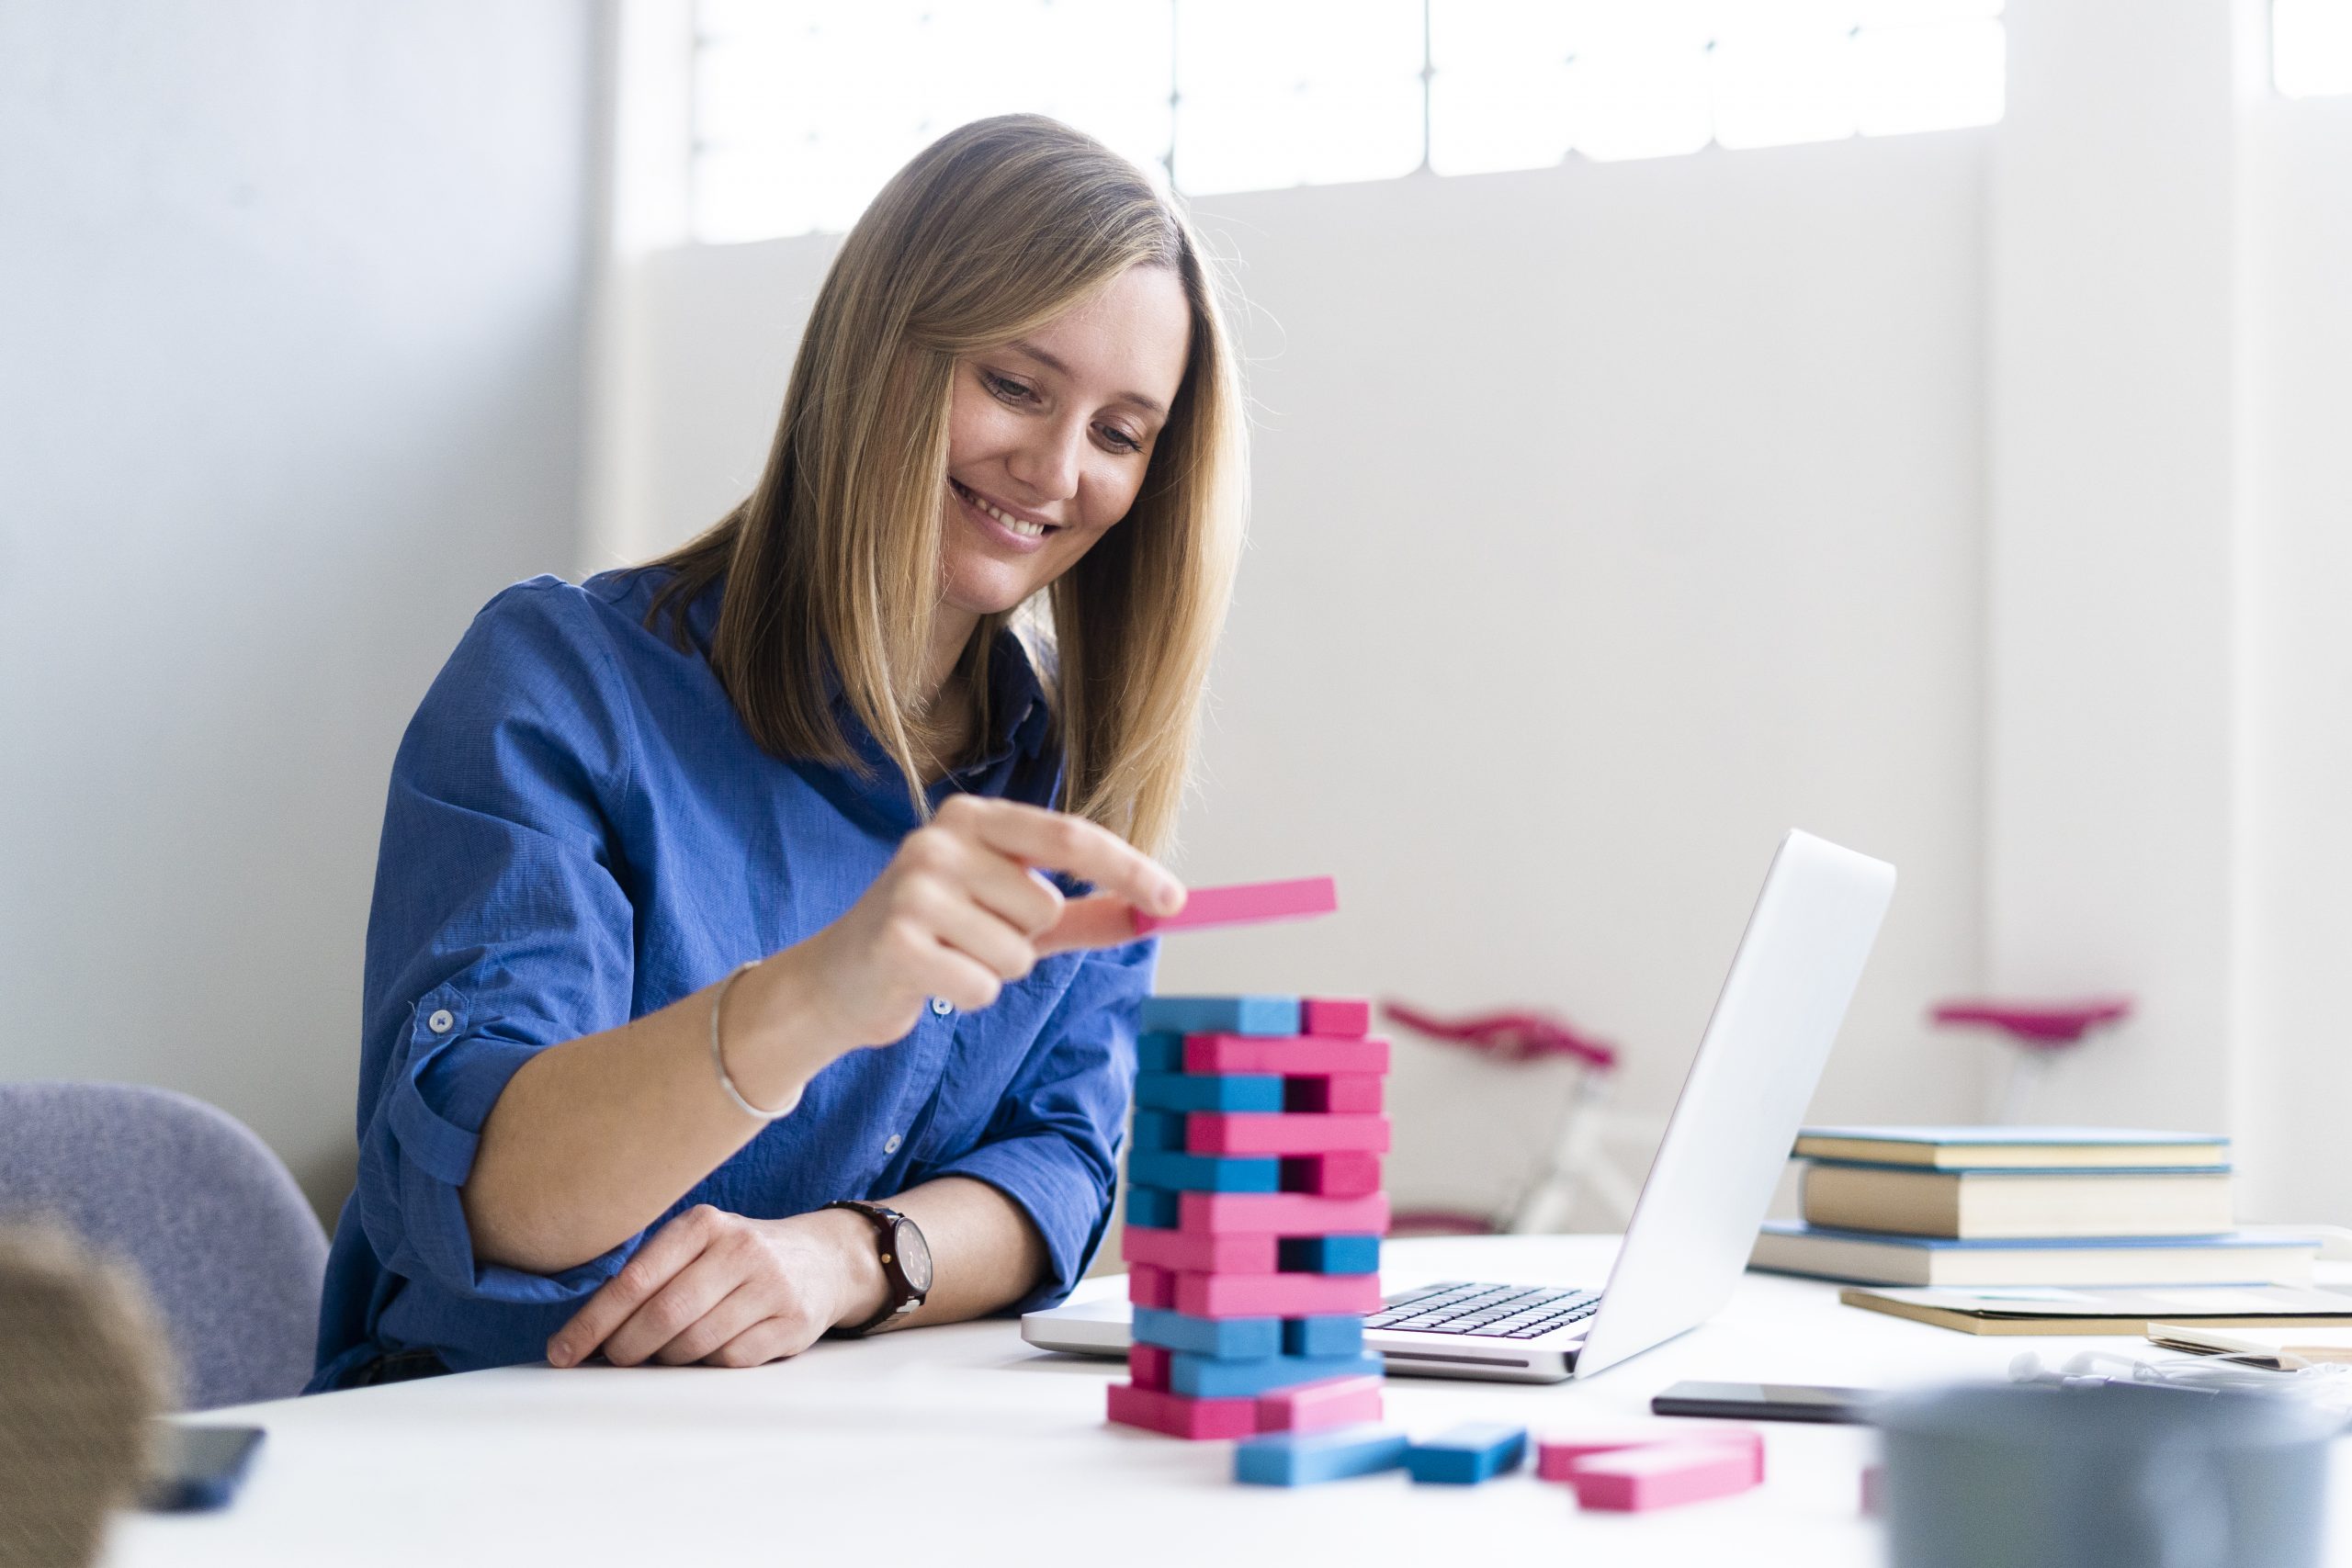 Smiling businesswoman playing block removal game at office